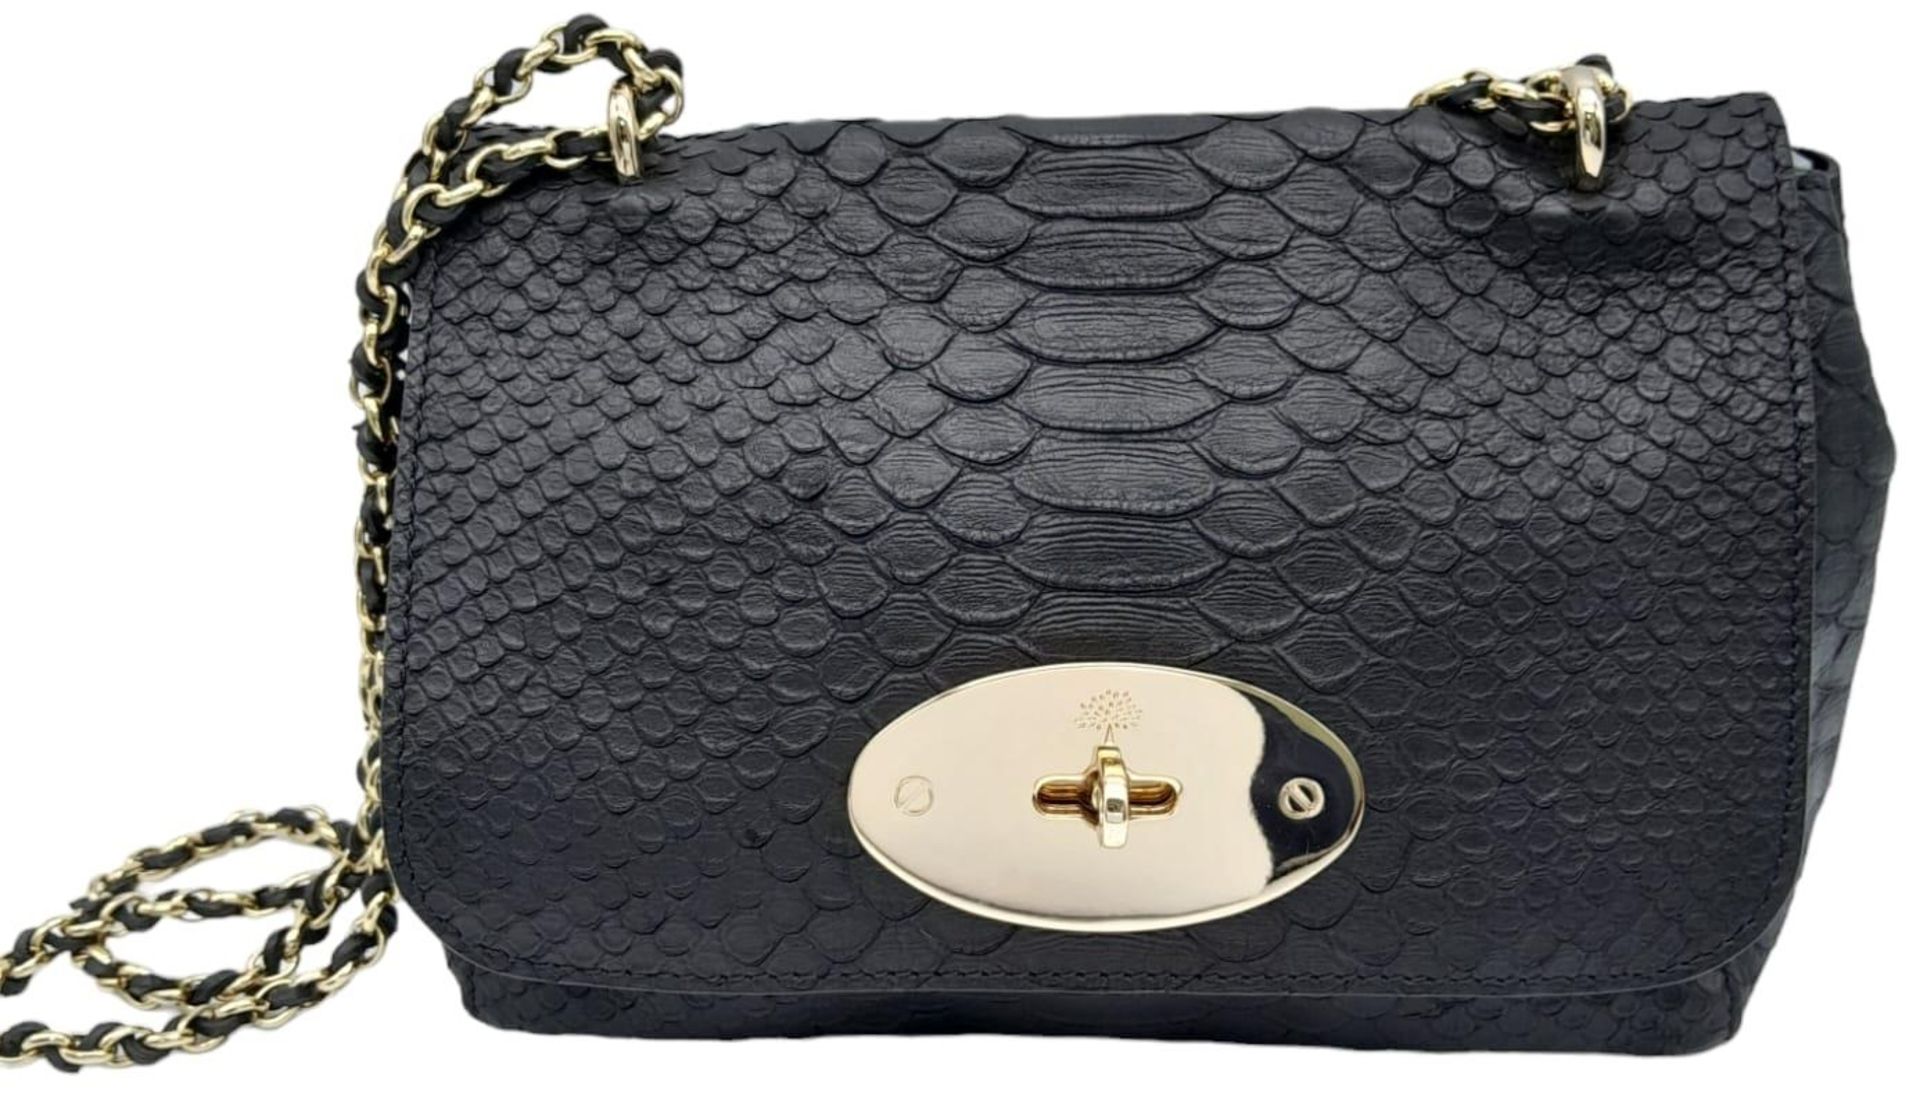 A Mulberry Black Cecily Shoulder Bag. Snakeskin exterior with gold-toned hardware, chain and leather